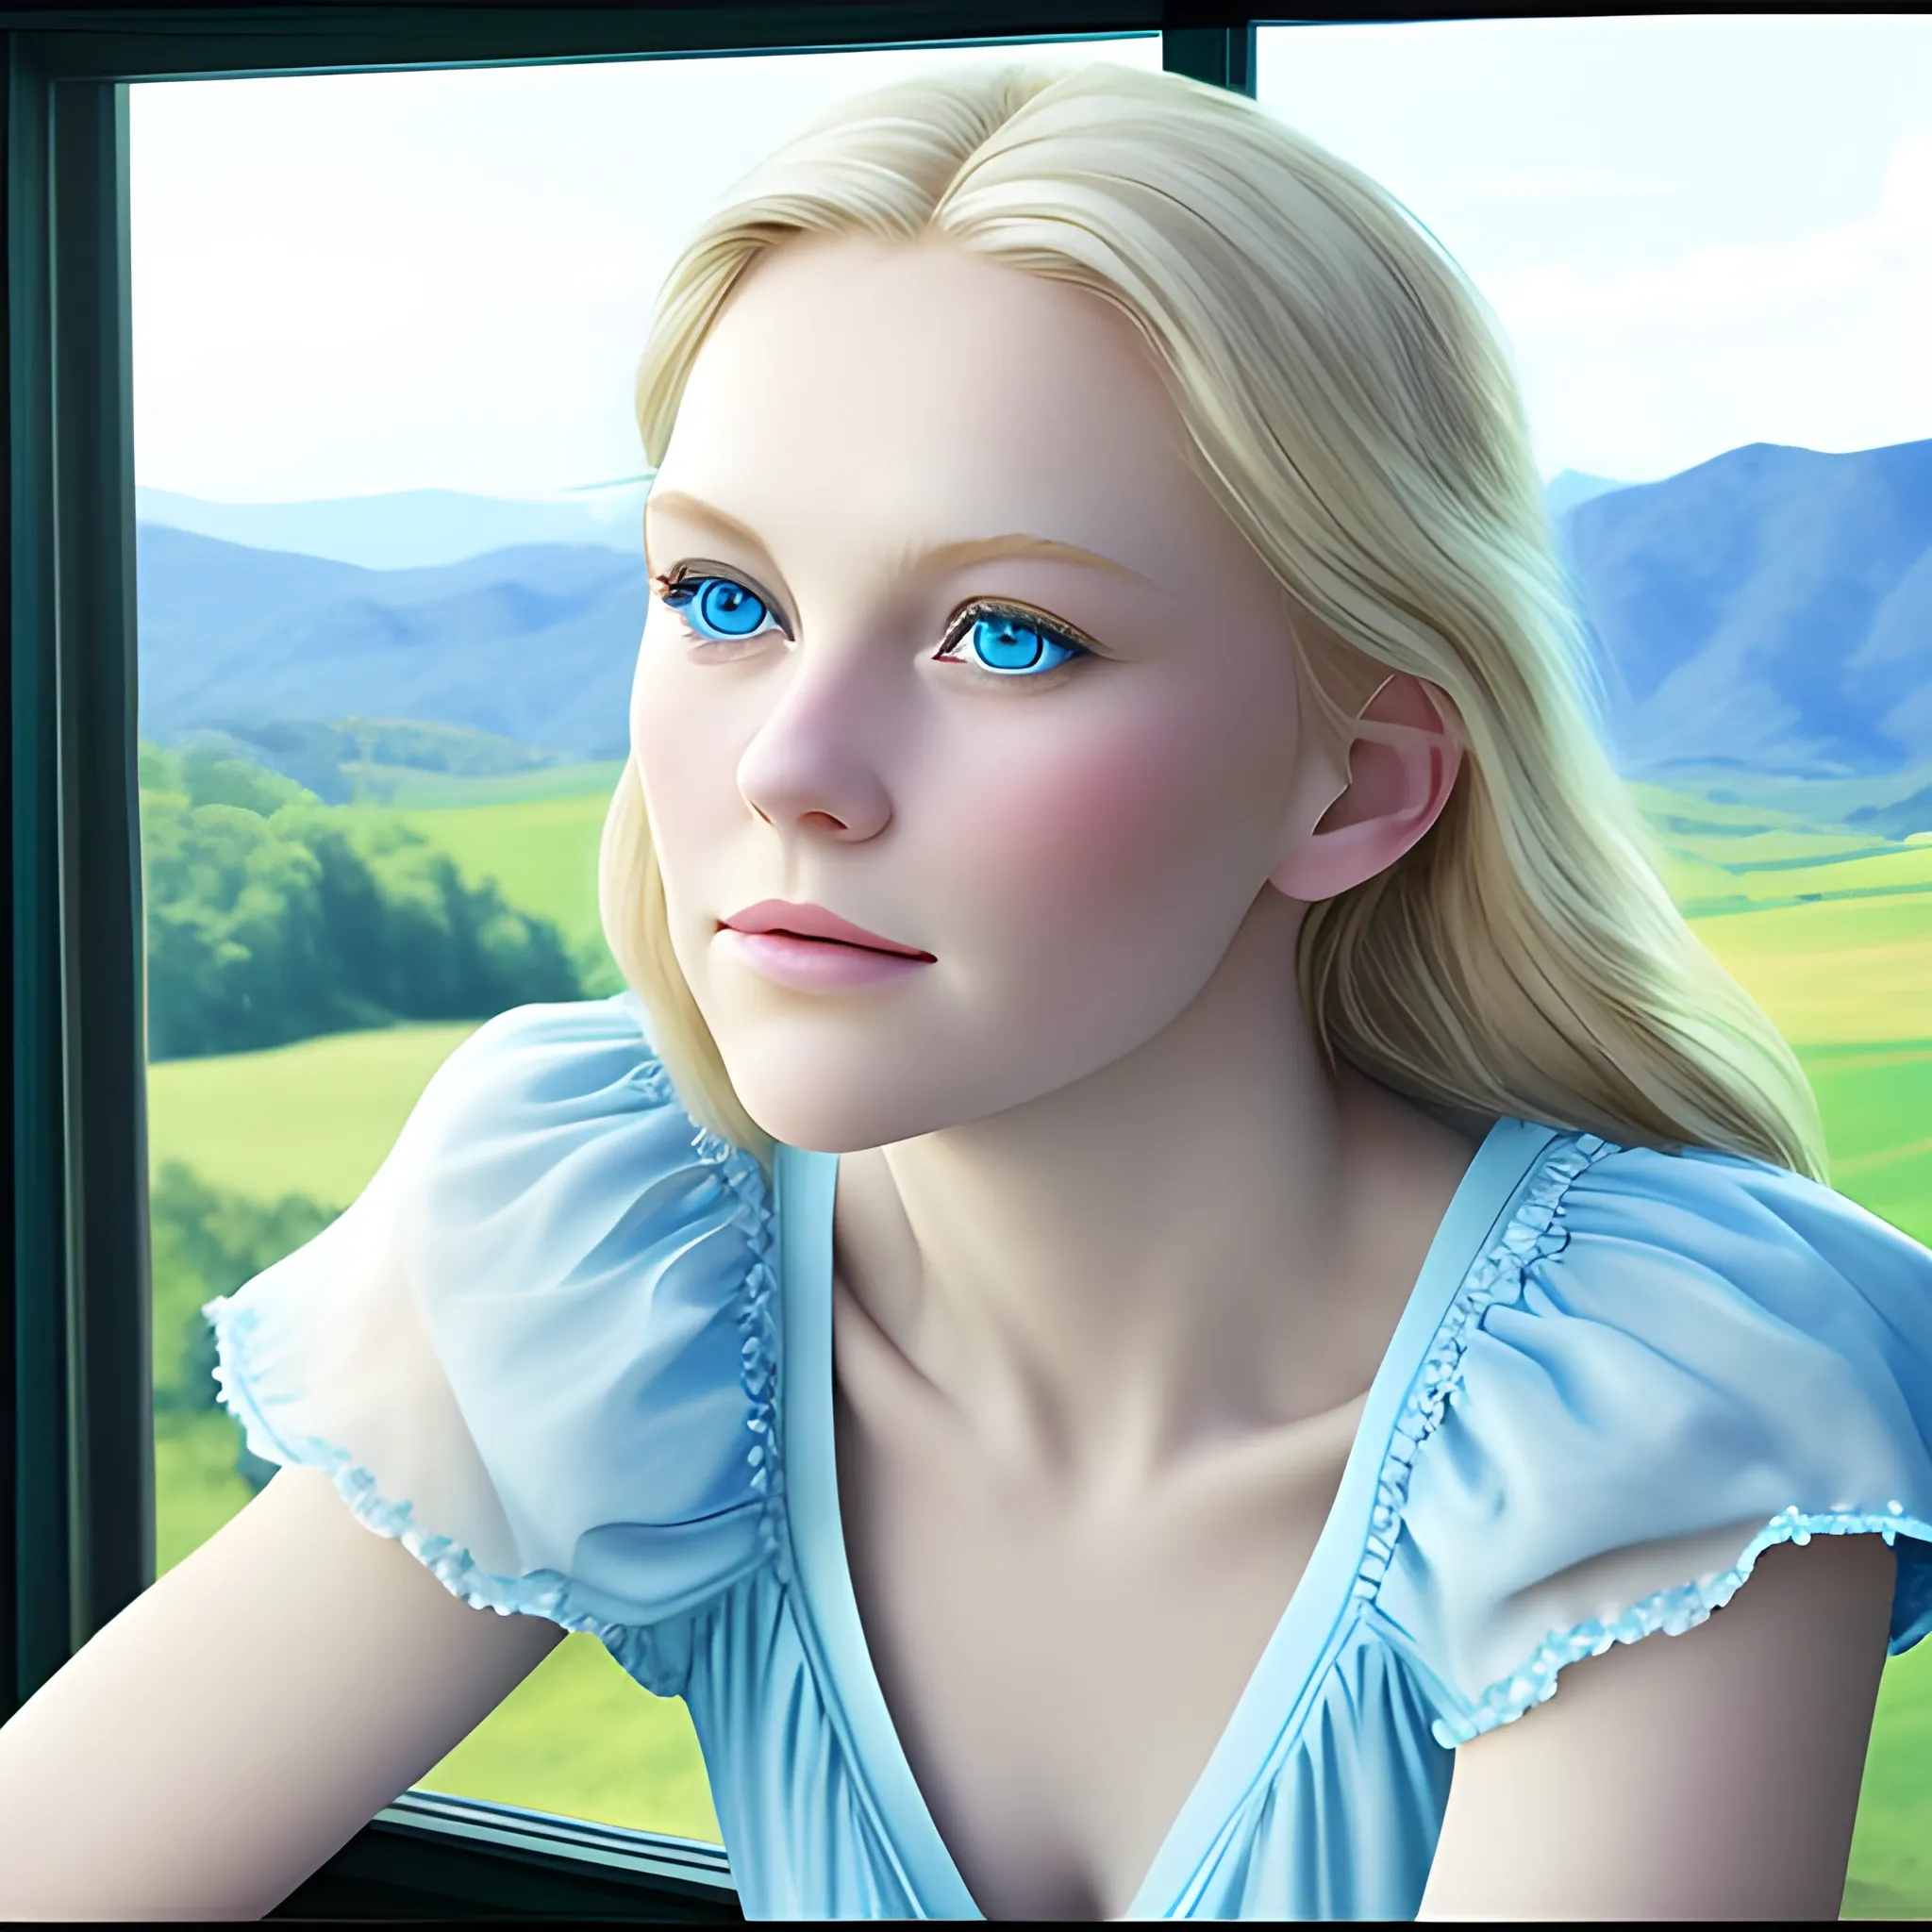 Blue skies and rolling hills fill the window behind a fair-skinned blonde lost in a daydream, her crystal blue eyes gazing wistfully into the middle distance above features delicate as porcelain.